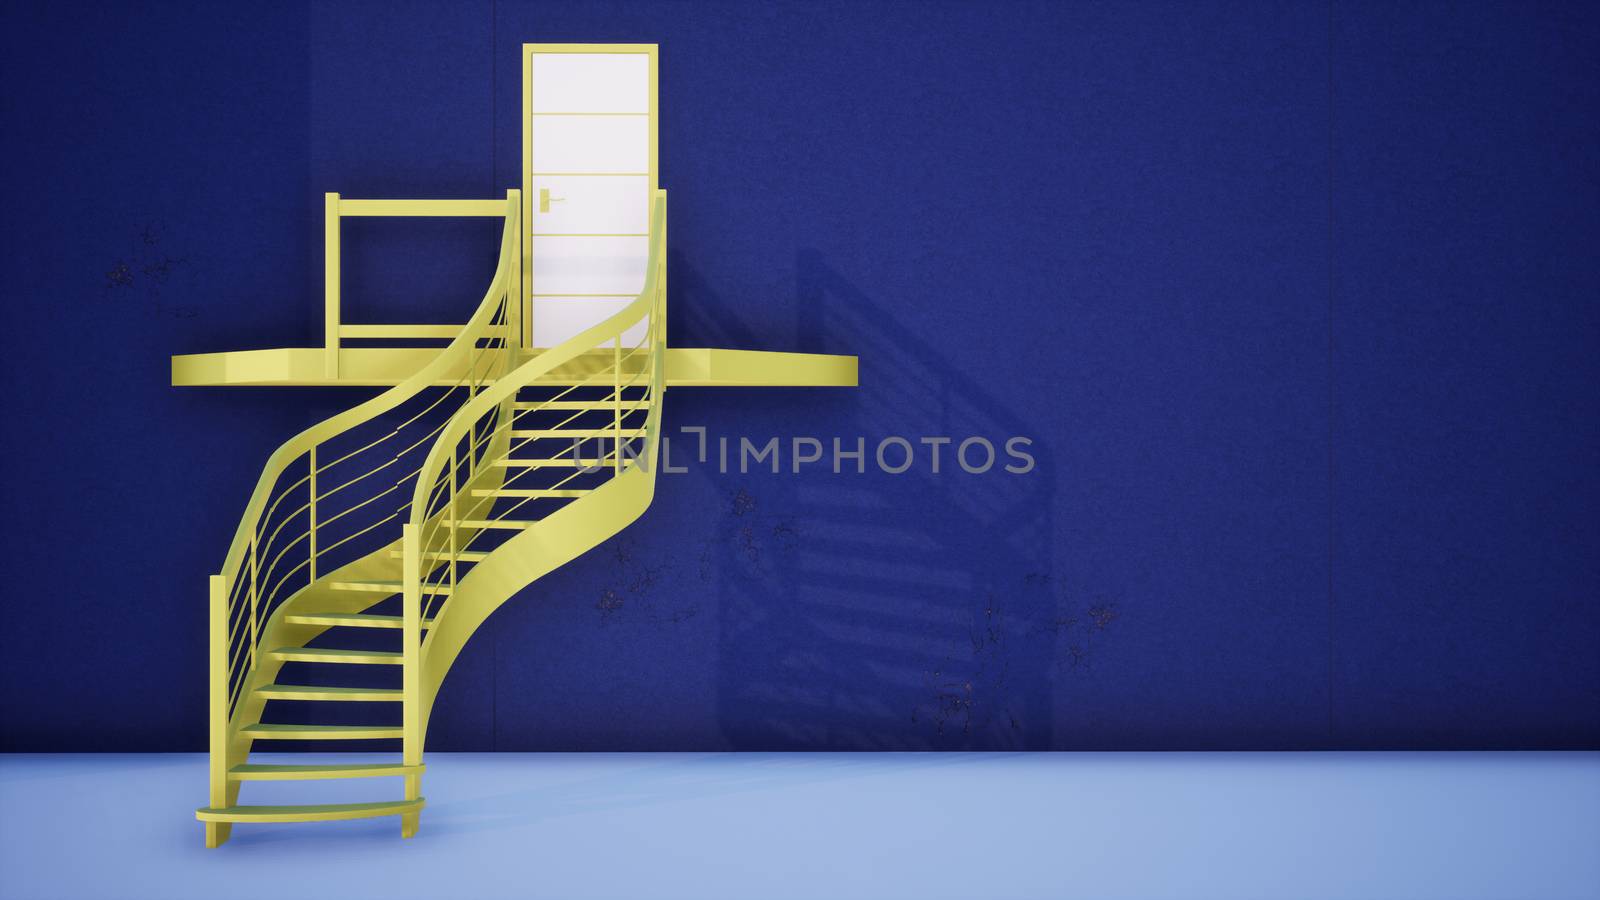 modern blue building with outdoor stairs, 3d rendering background